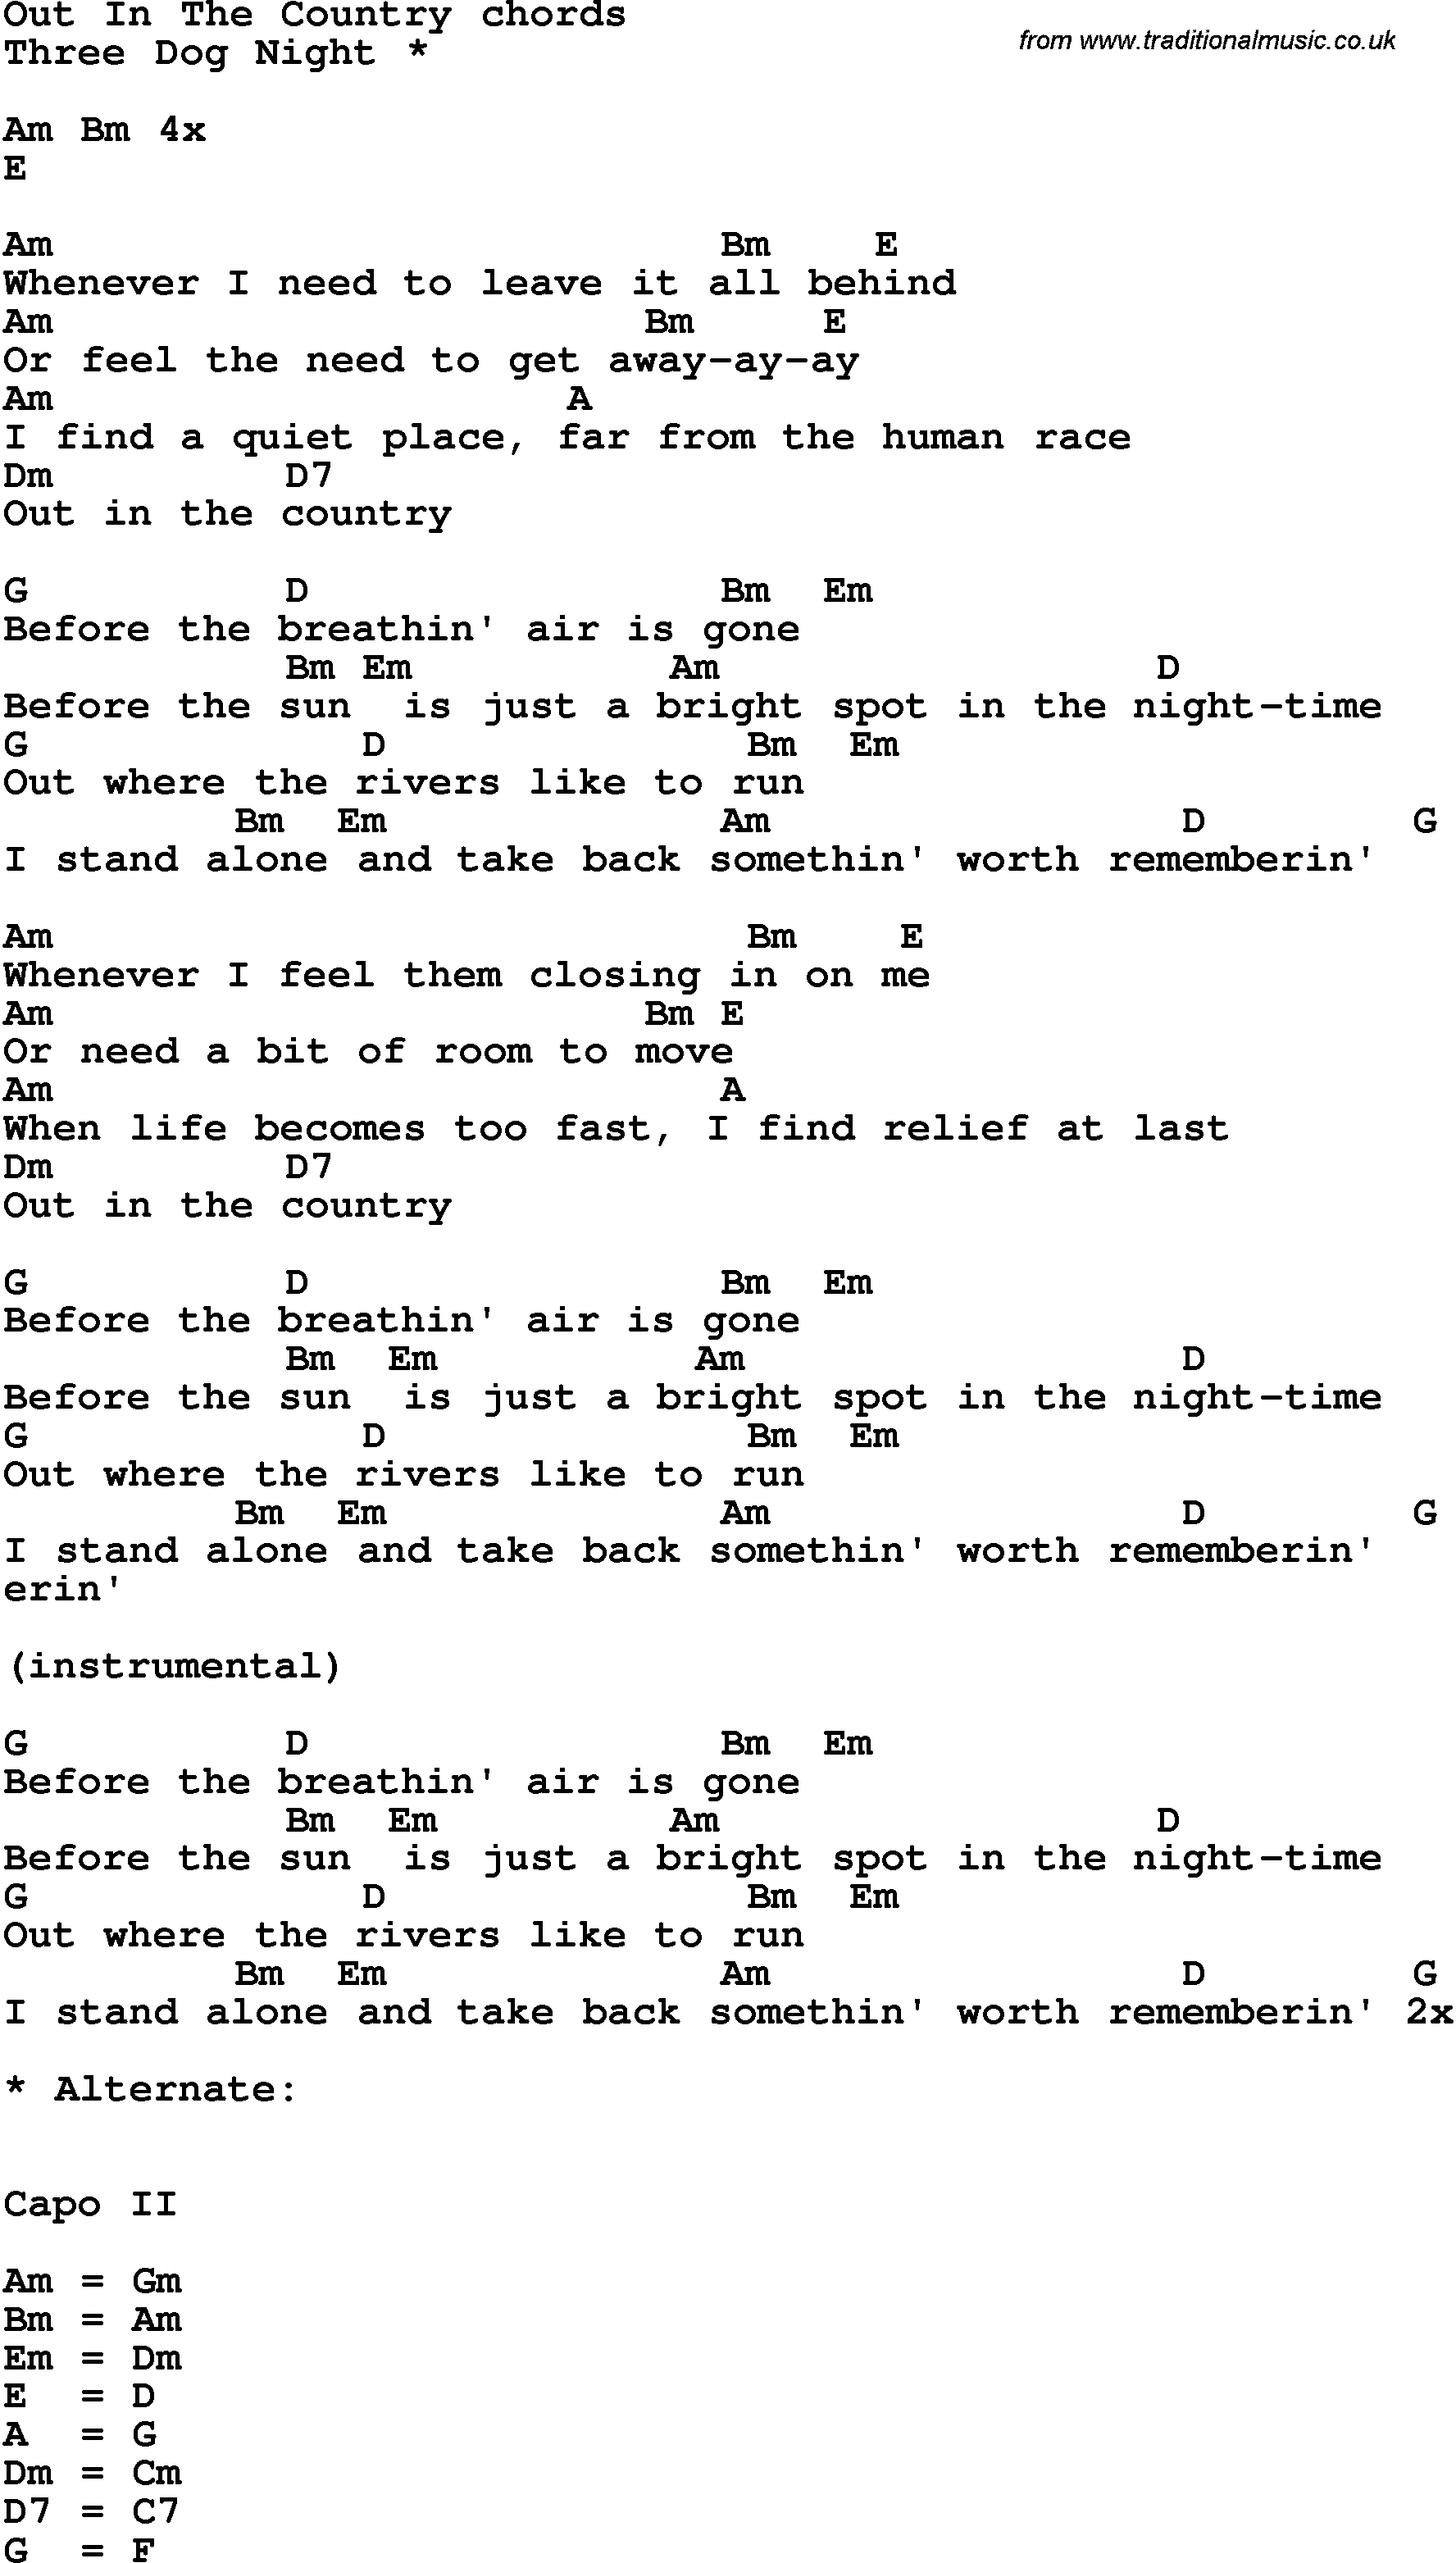 Song Lyrics with guitar chords for Out In The Country